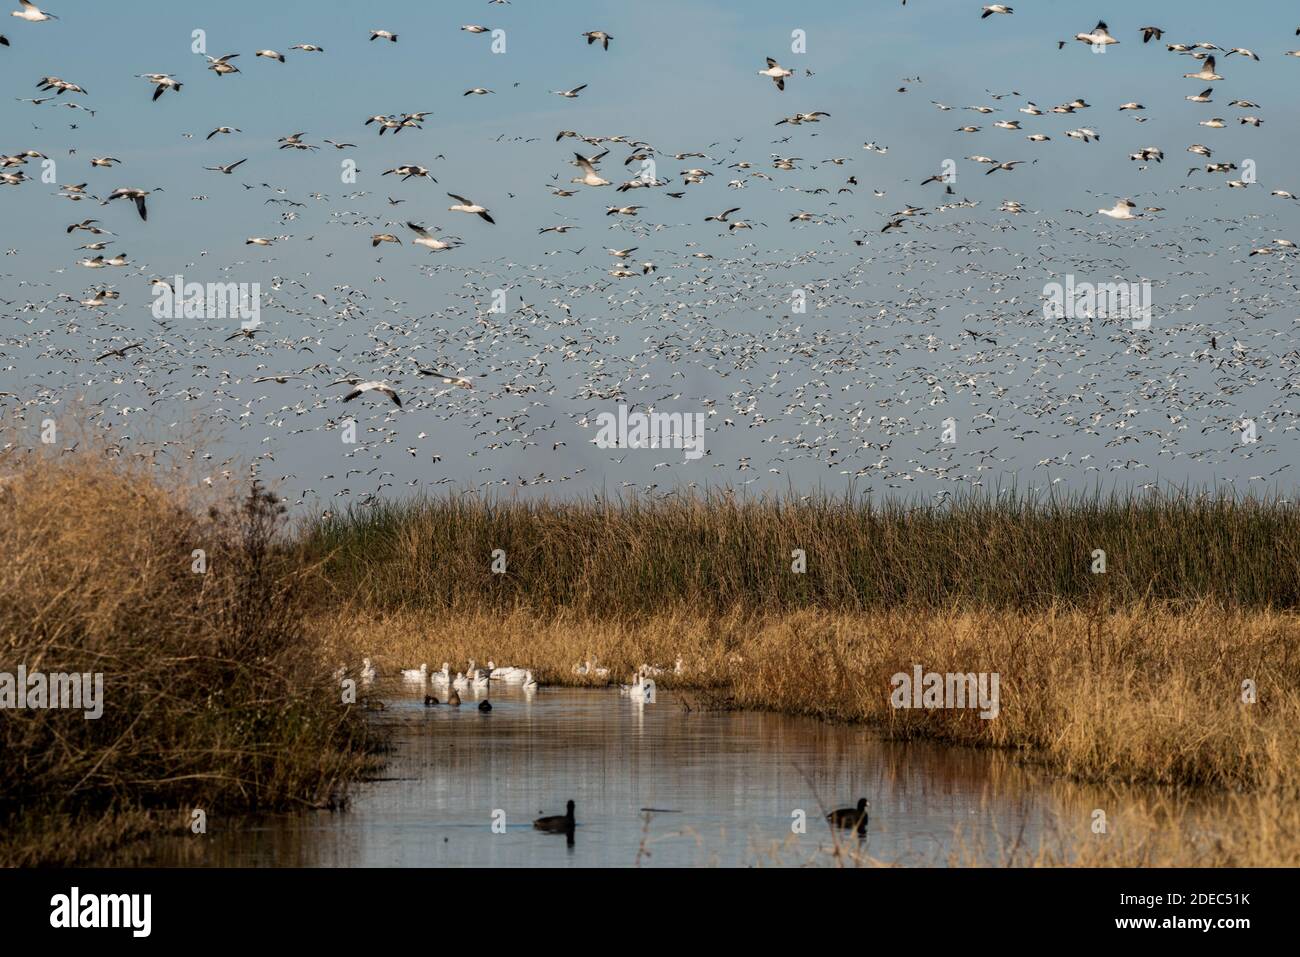 Migrating snow geese (Anser caerulescens) arrive at Sacramento NWR in California in late fall by the tens of thousands. Stock Photo